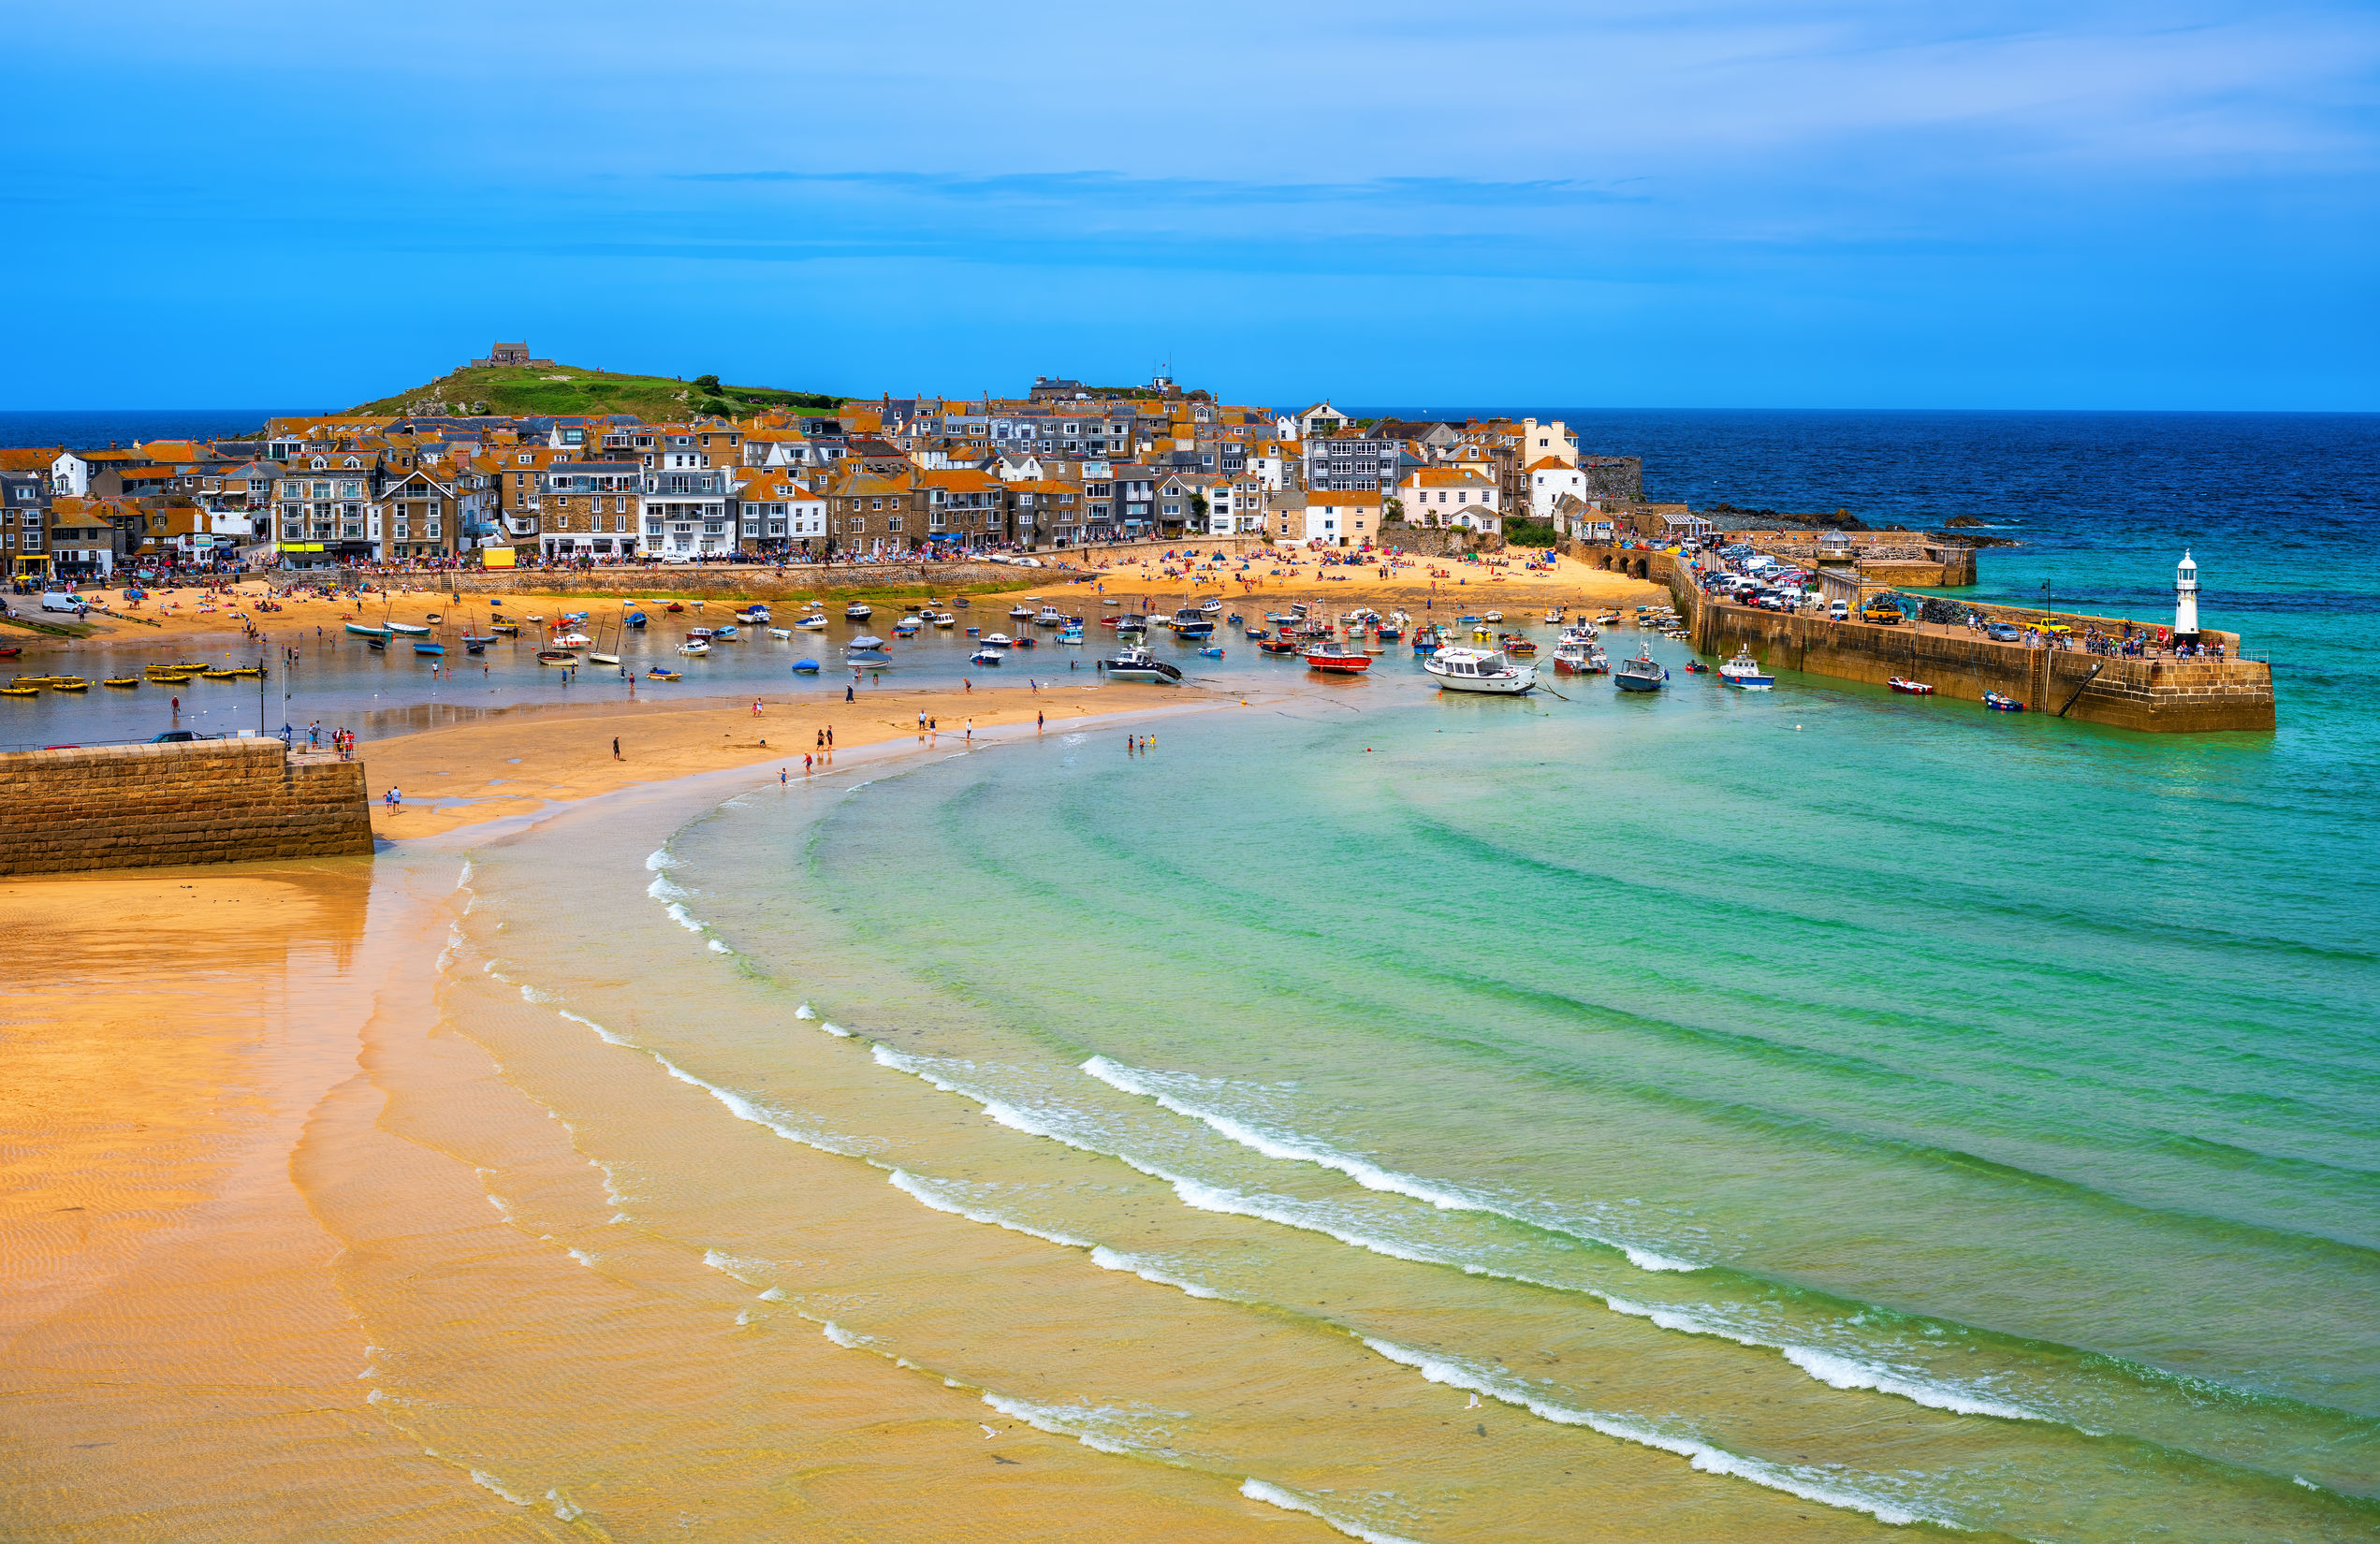 Picturesque St Ives, a popular seaside town with golden sand beach in Cornwall, England